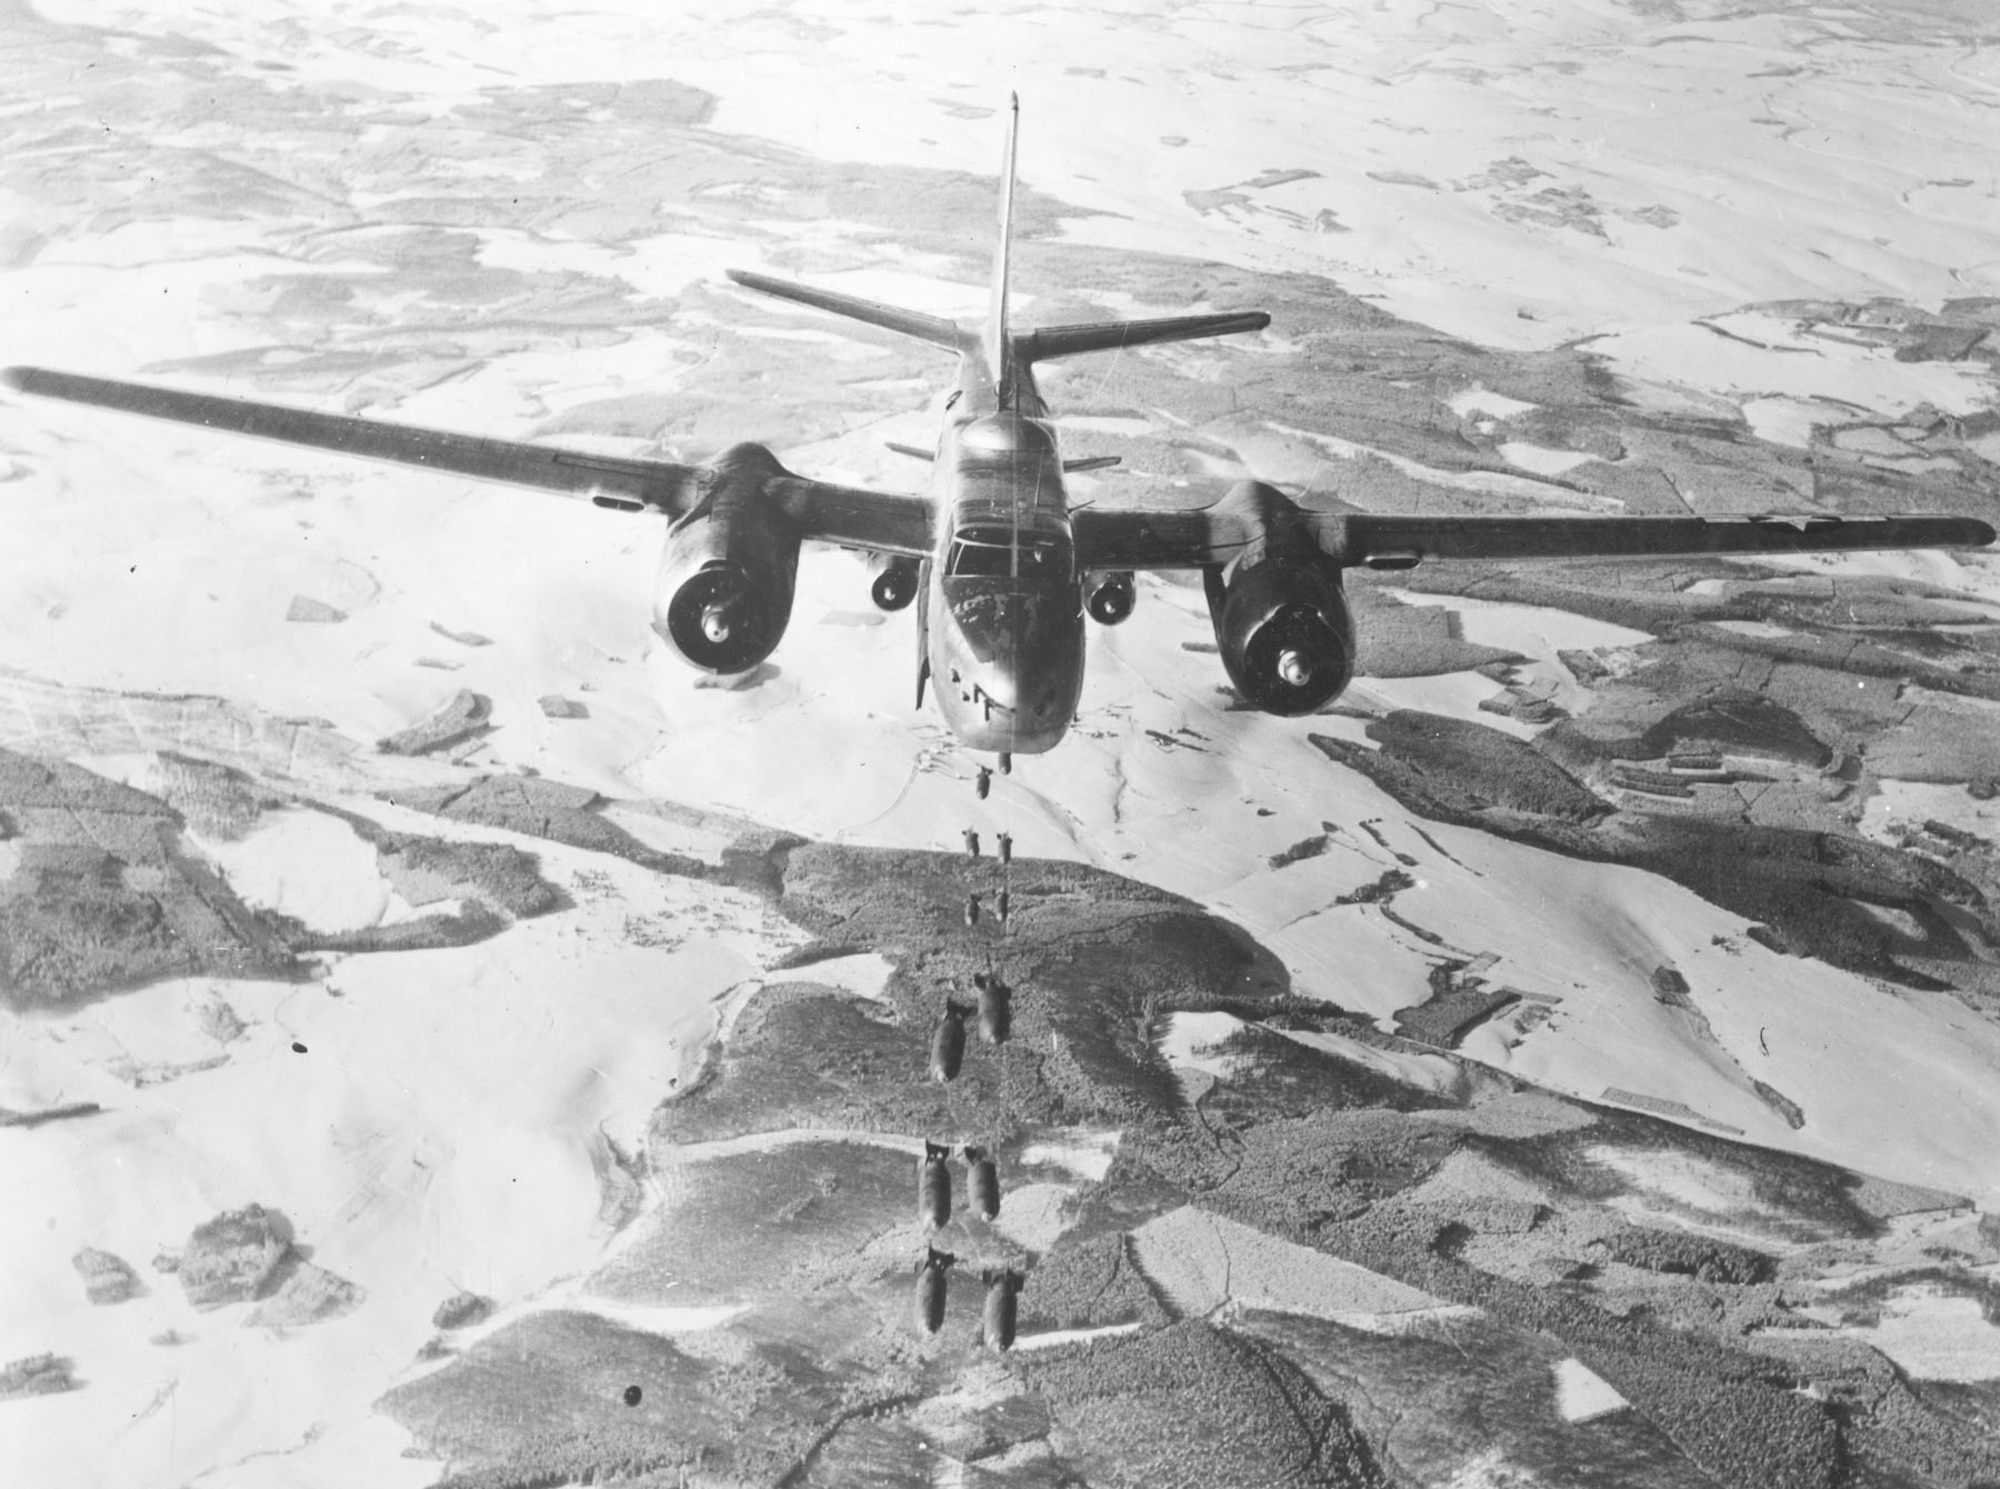 A-26 Invader attack aircraft dropping bombs on the Siegfried Line. (U.S. Air Force photo)